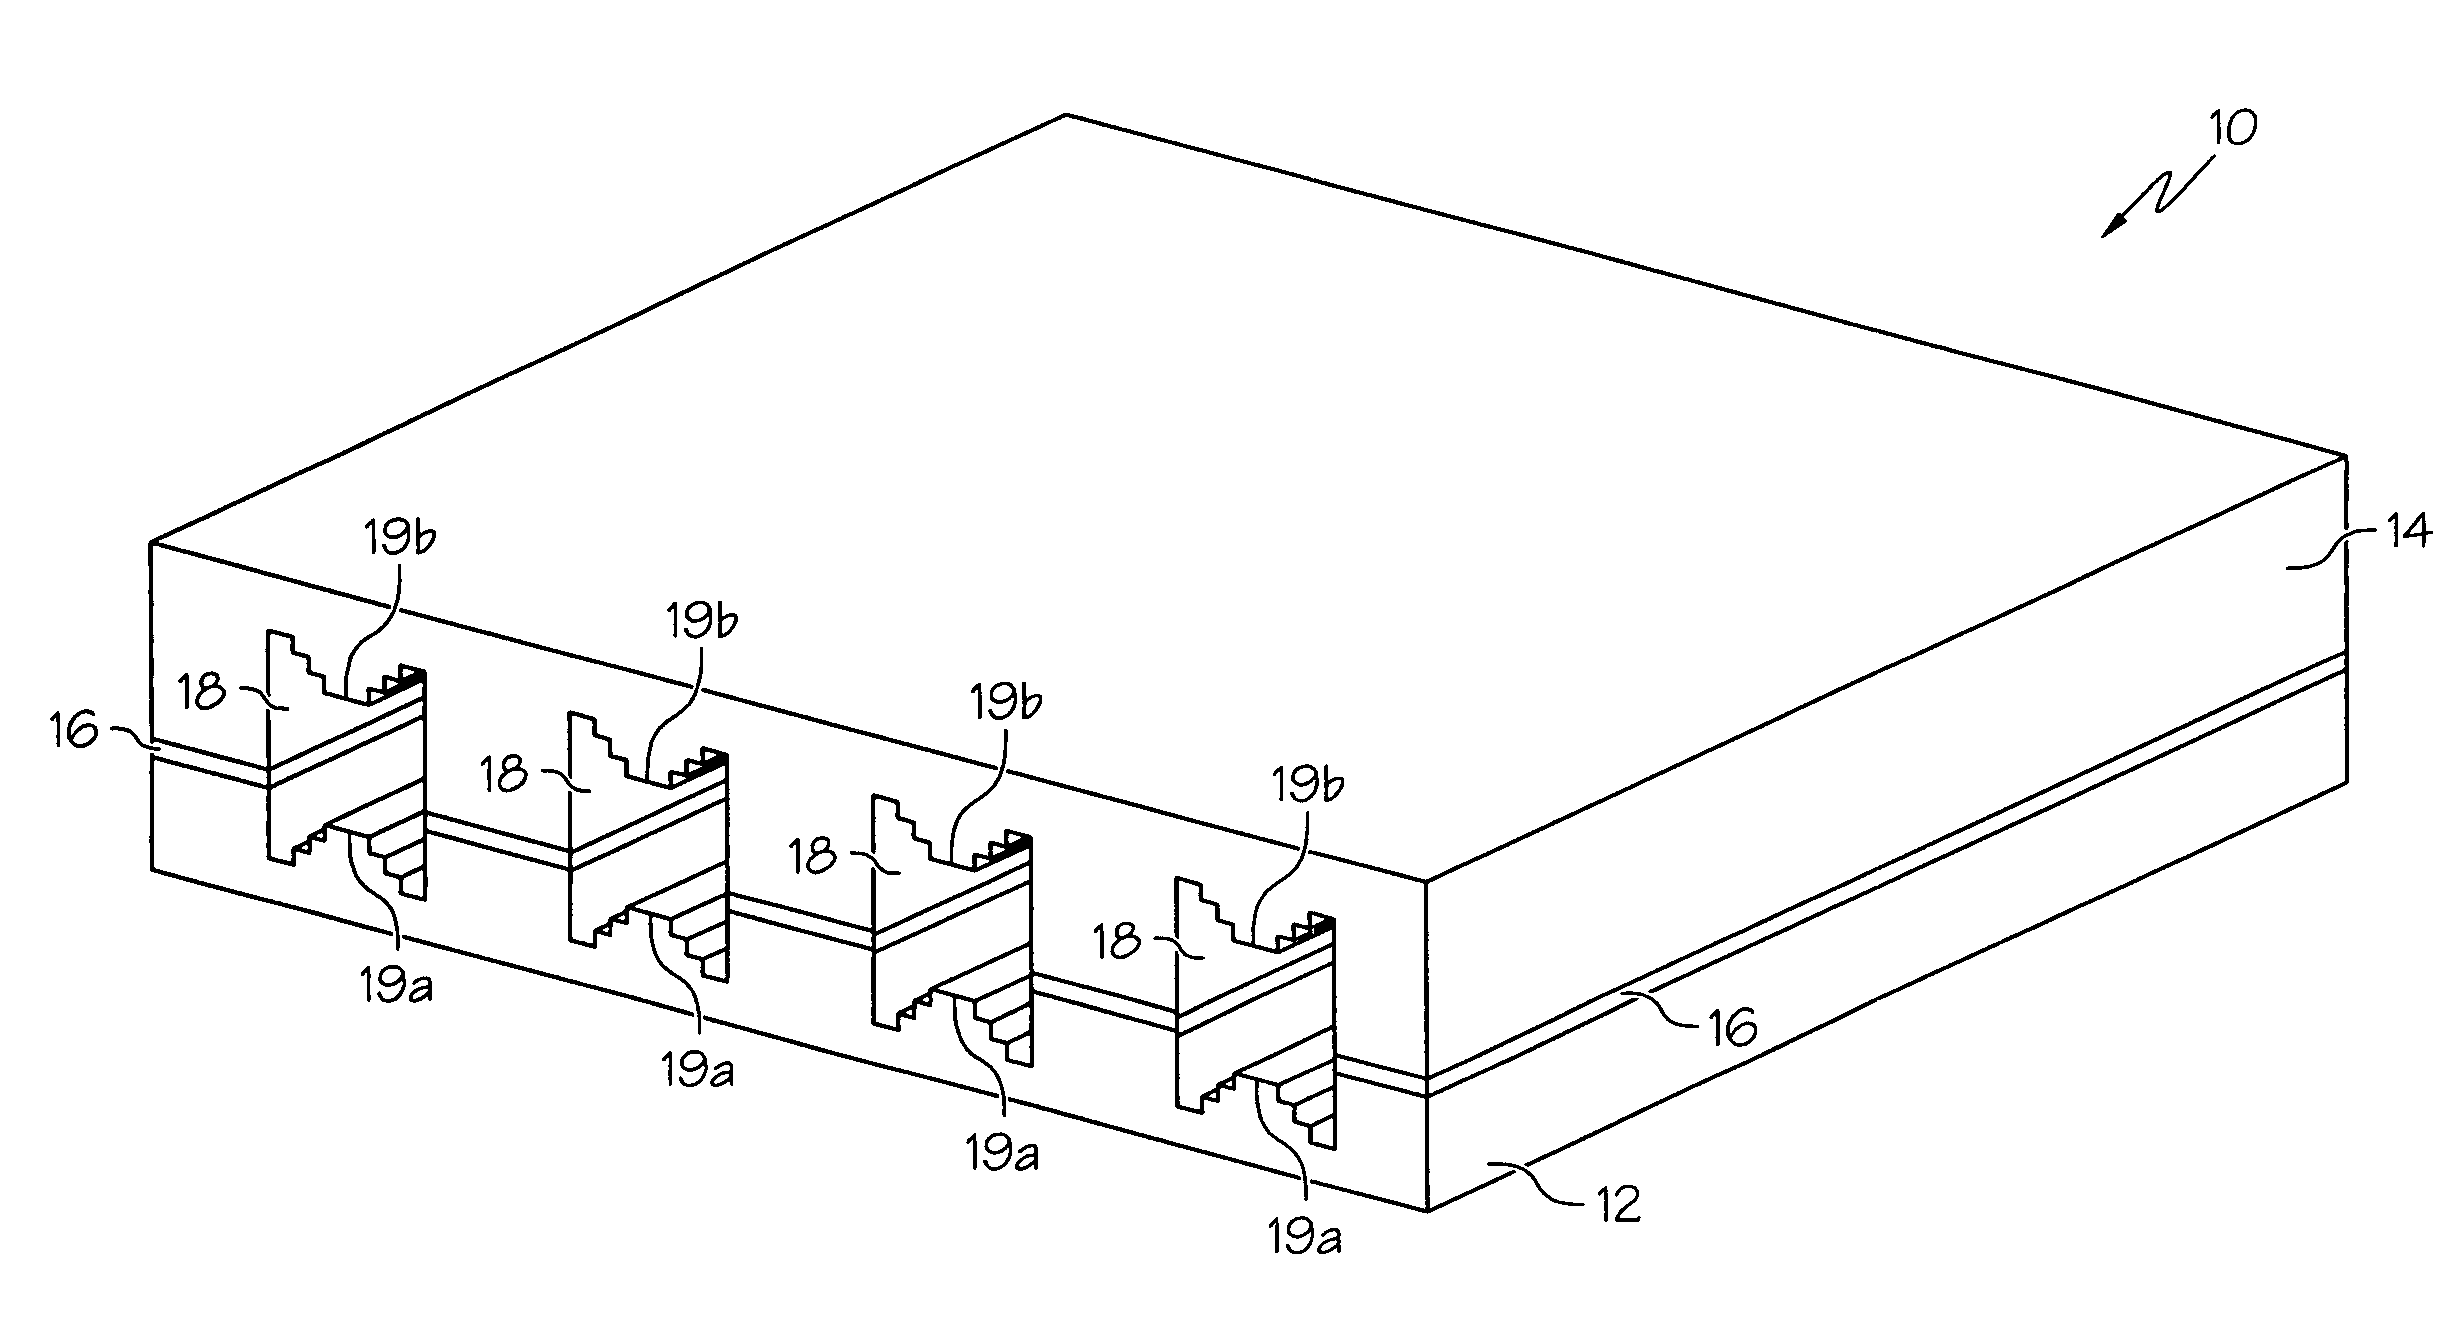 Heat-dissipating component having stair-stepped coolant channels